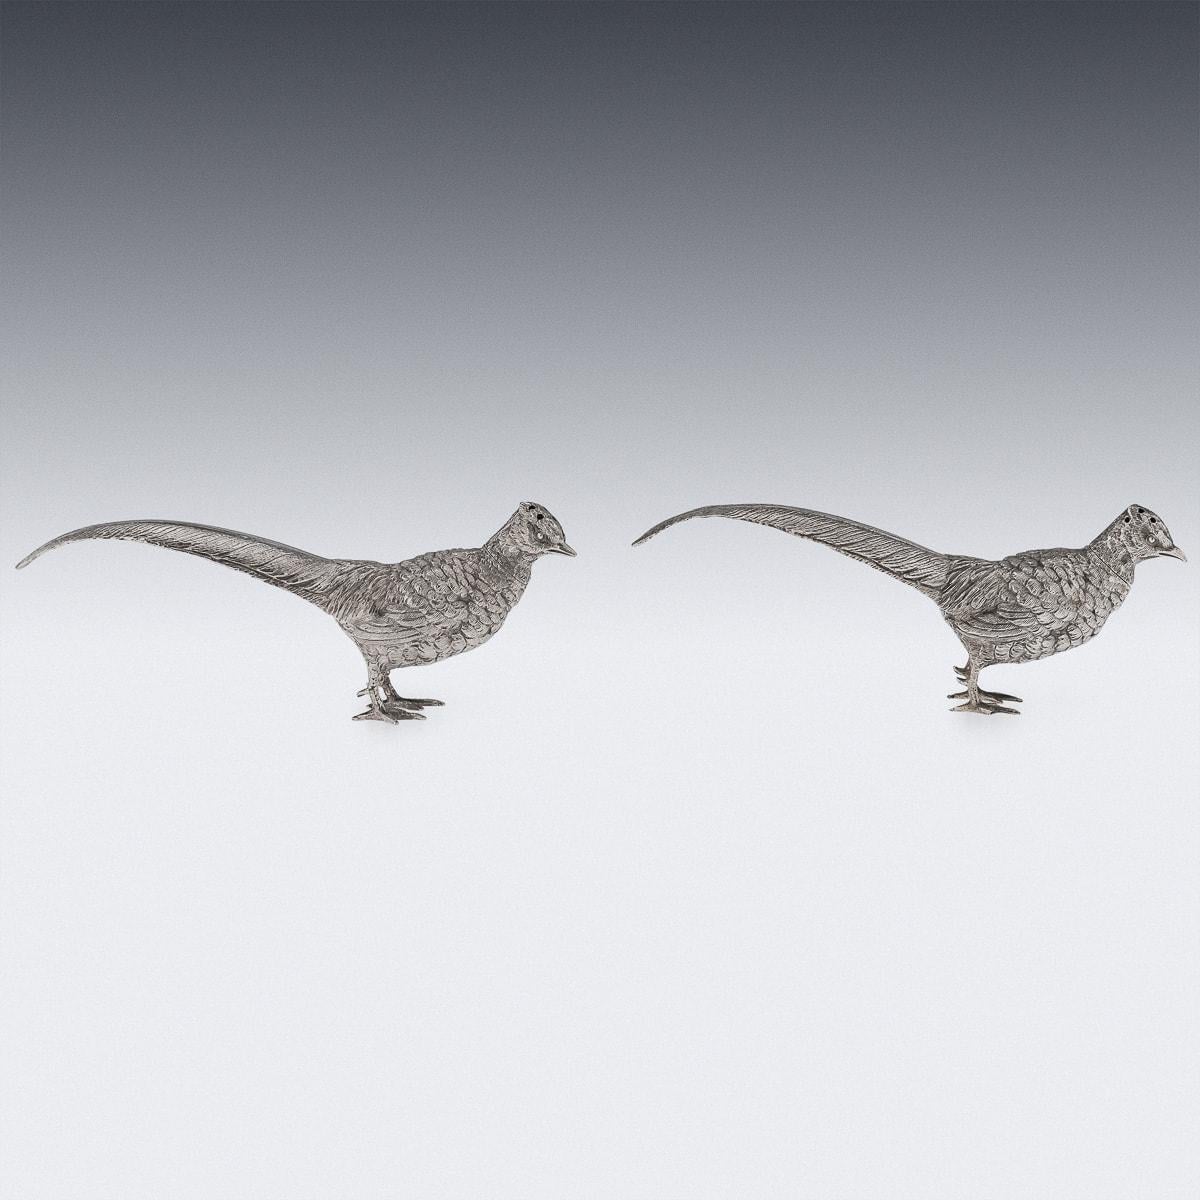 Antique early 20th Century Edwardian solid silver pair of novelty salt & pepper, each beautifully cast and realistically modelled as standing pheasants, the body cast with a detailed textured plumage, detachable heads. Hallmarked English silver (925